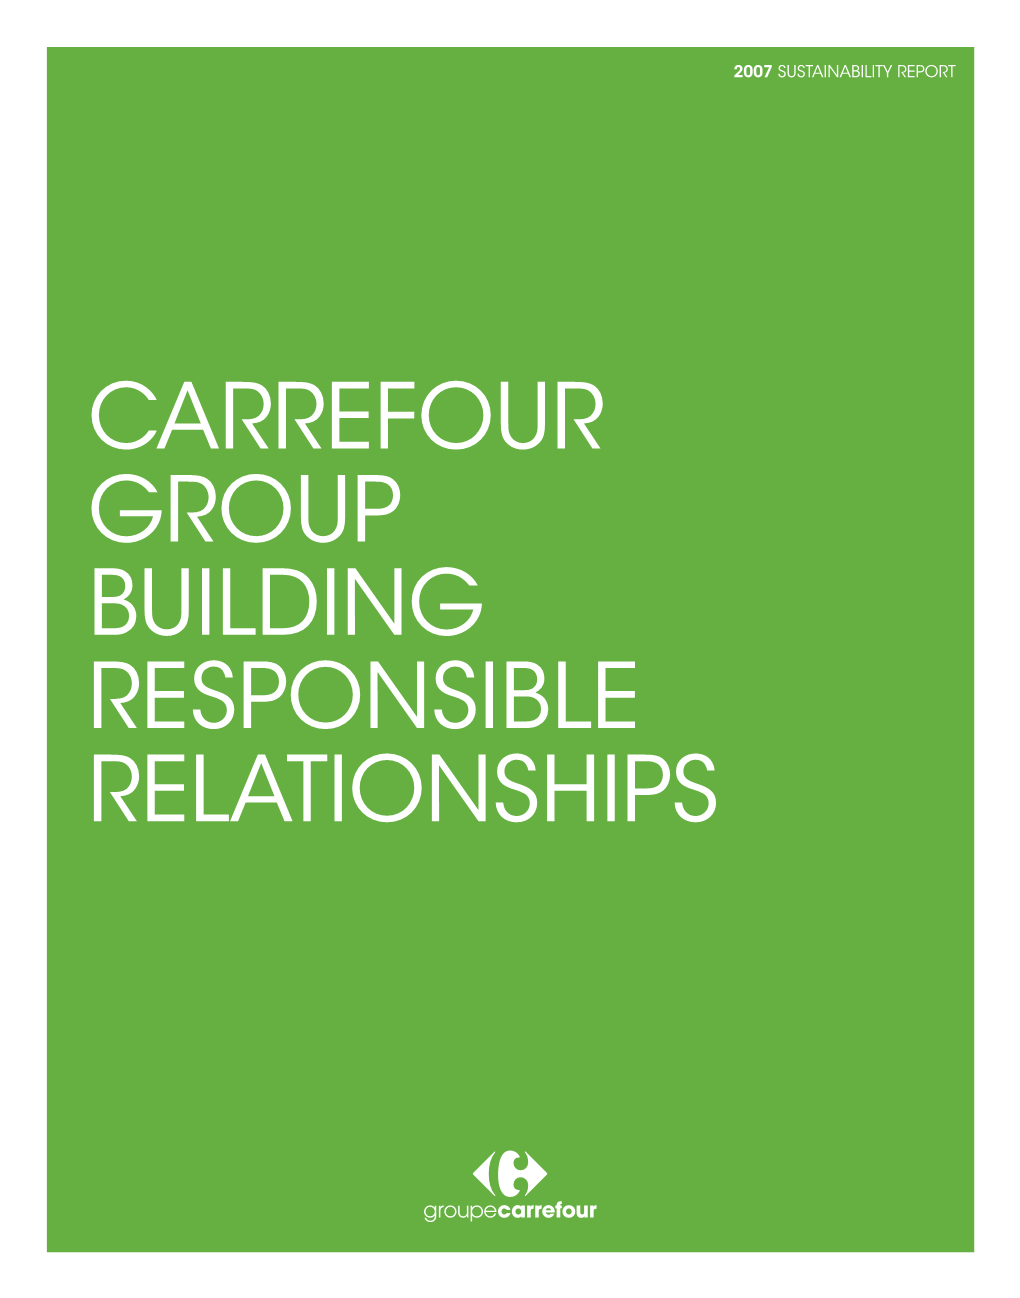 Carrefour Group Building Responsible Relationships No.1 in Europe